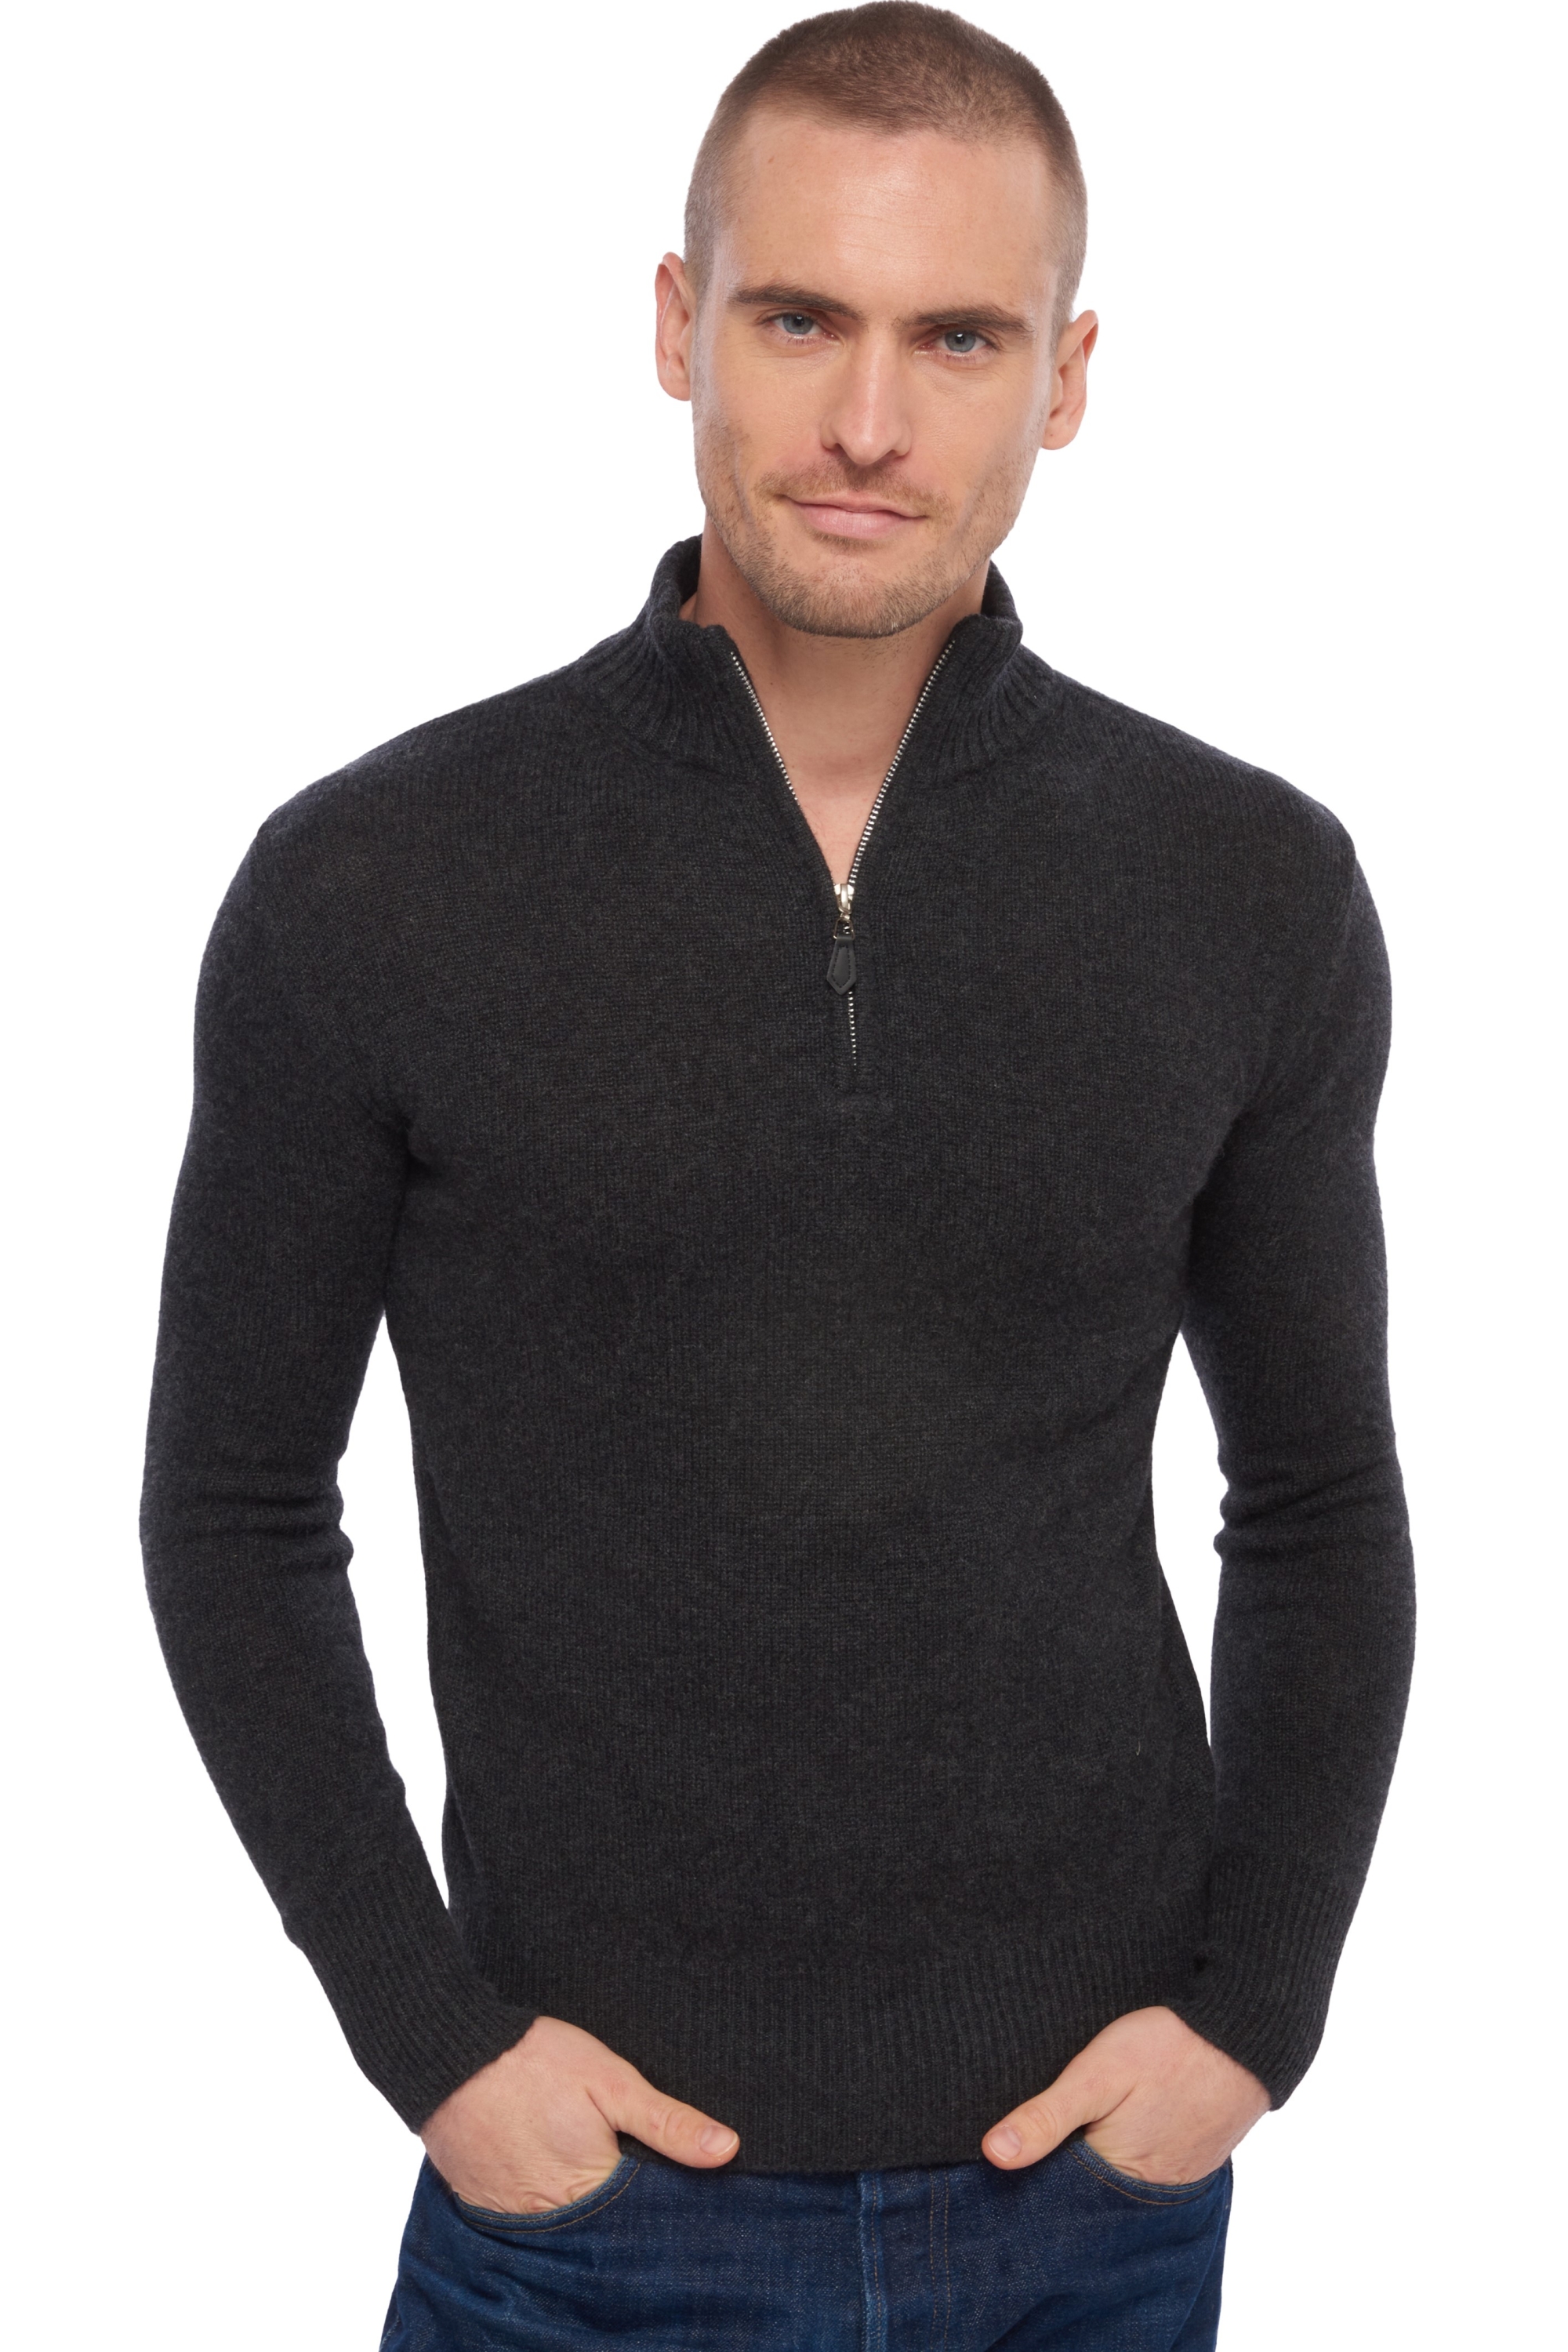 Cashmere men polo style sweaters donovan charcoal marl 4xl